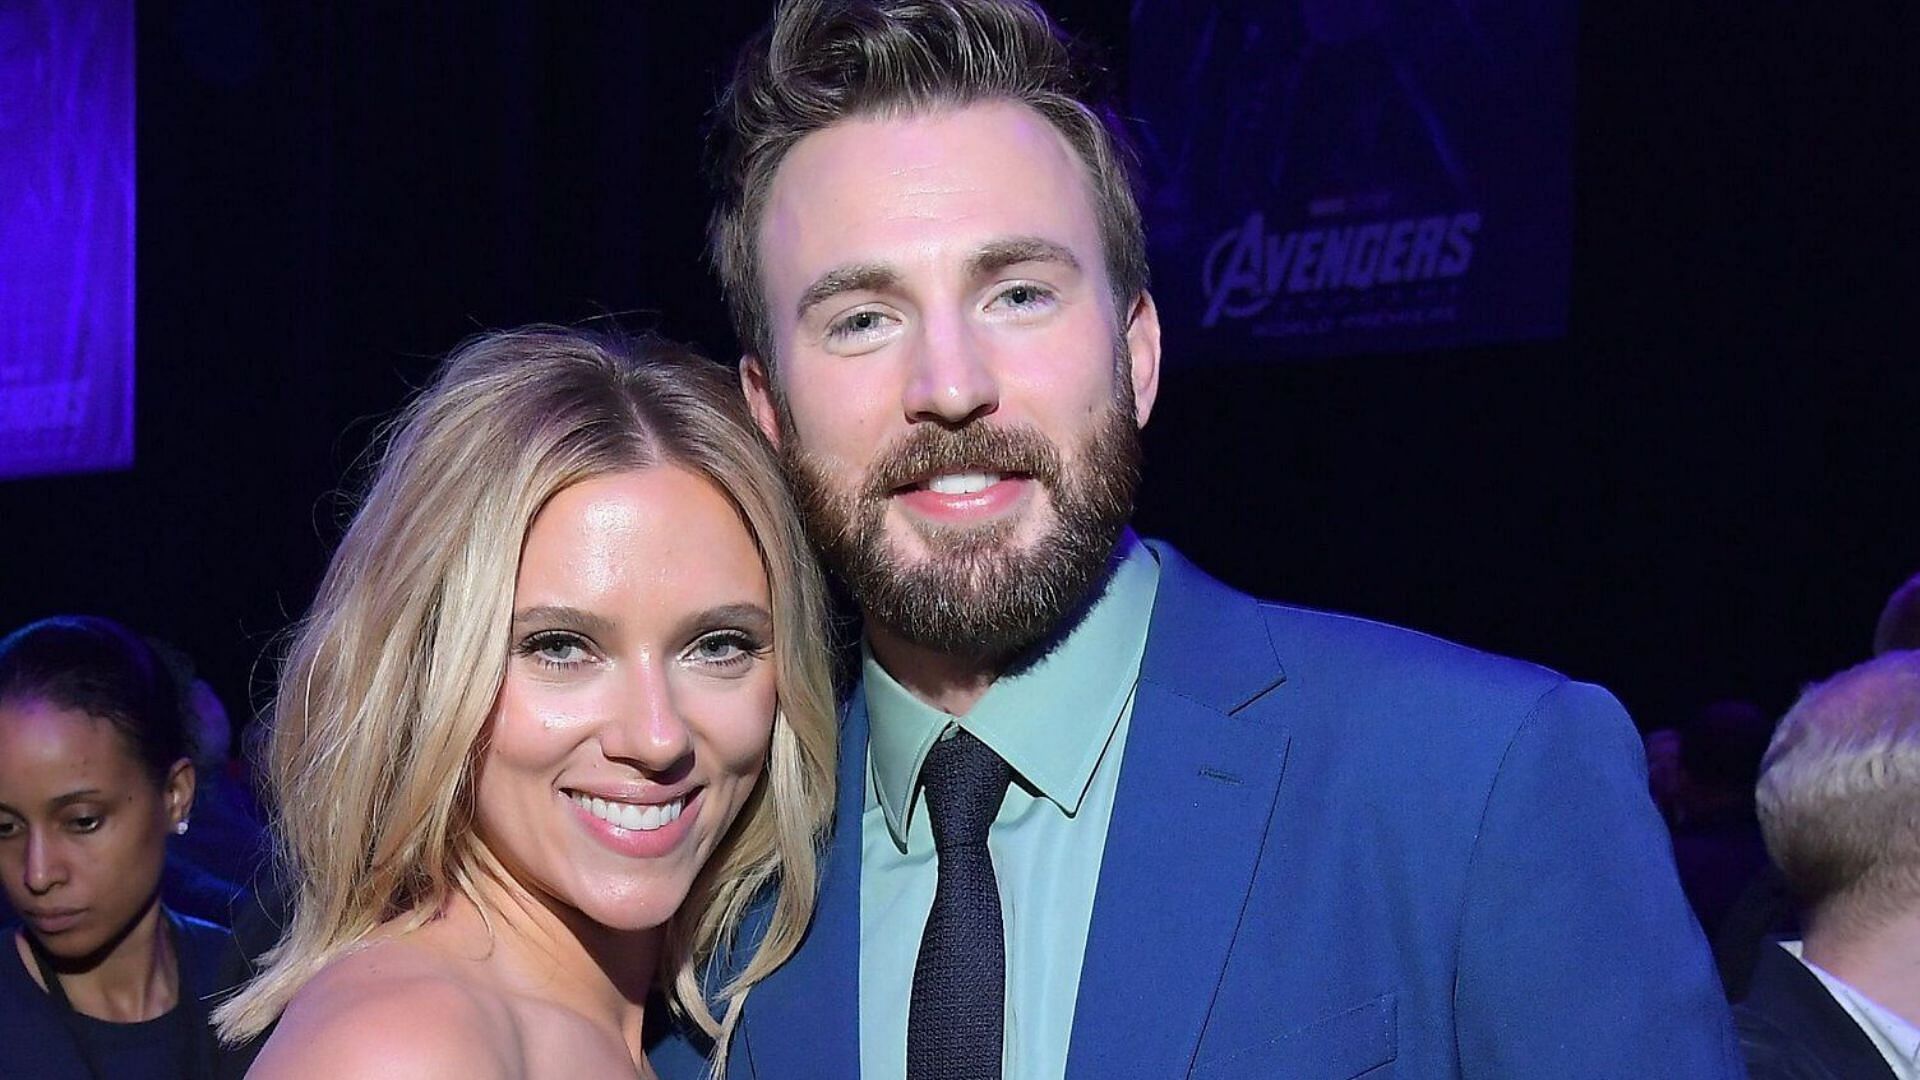 Scarlett Johansson and Chris Evans all set to team up for Project Artemis (Image via Pintrest)